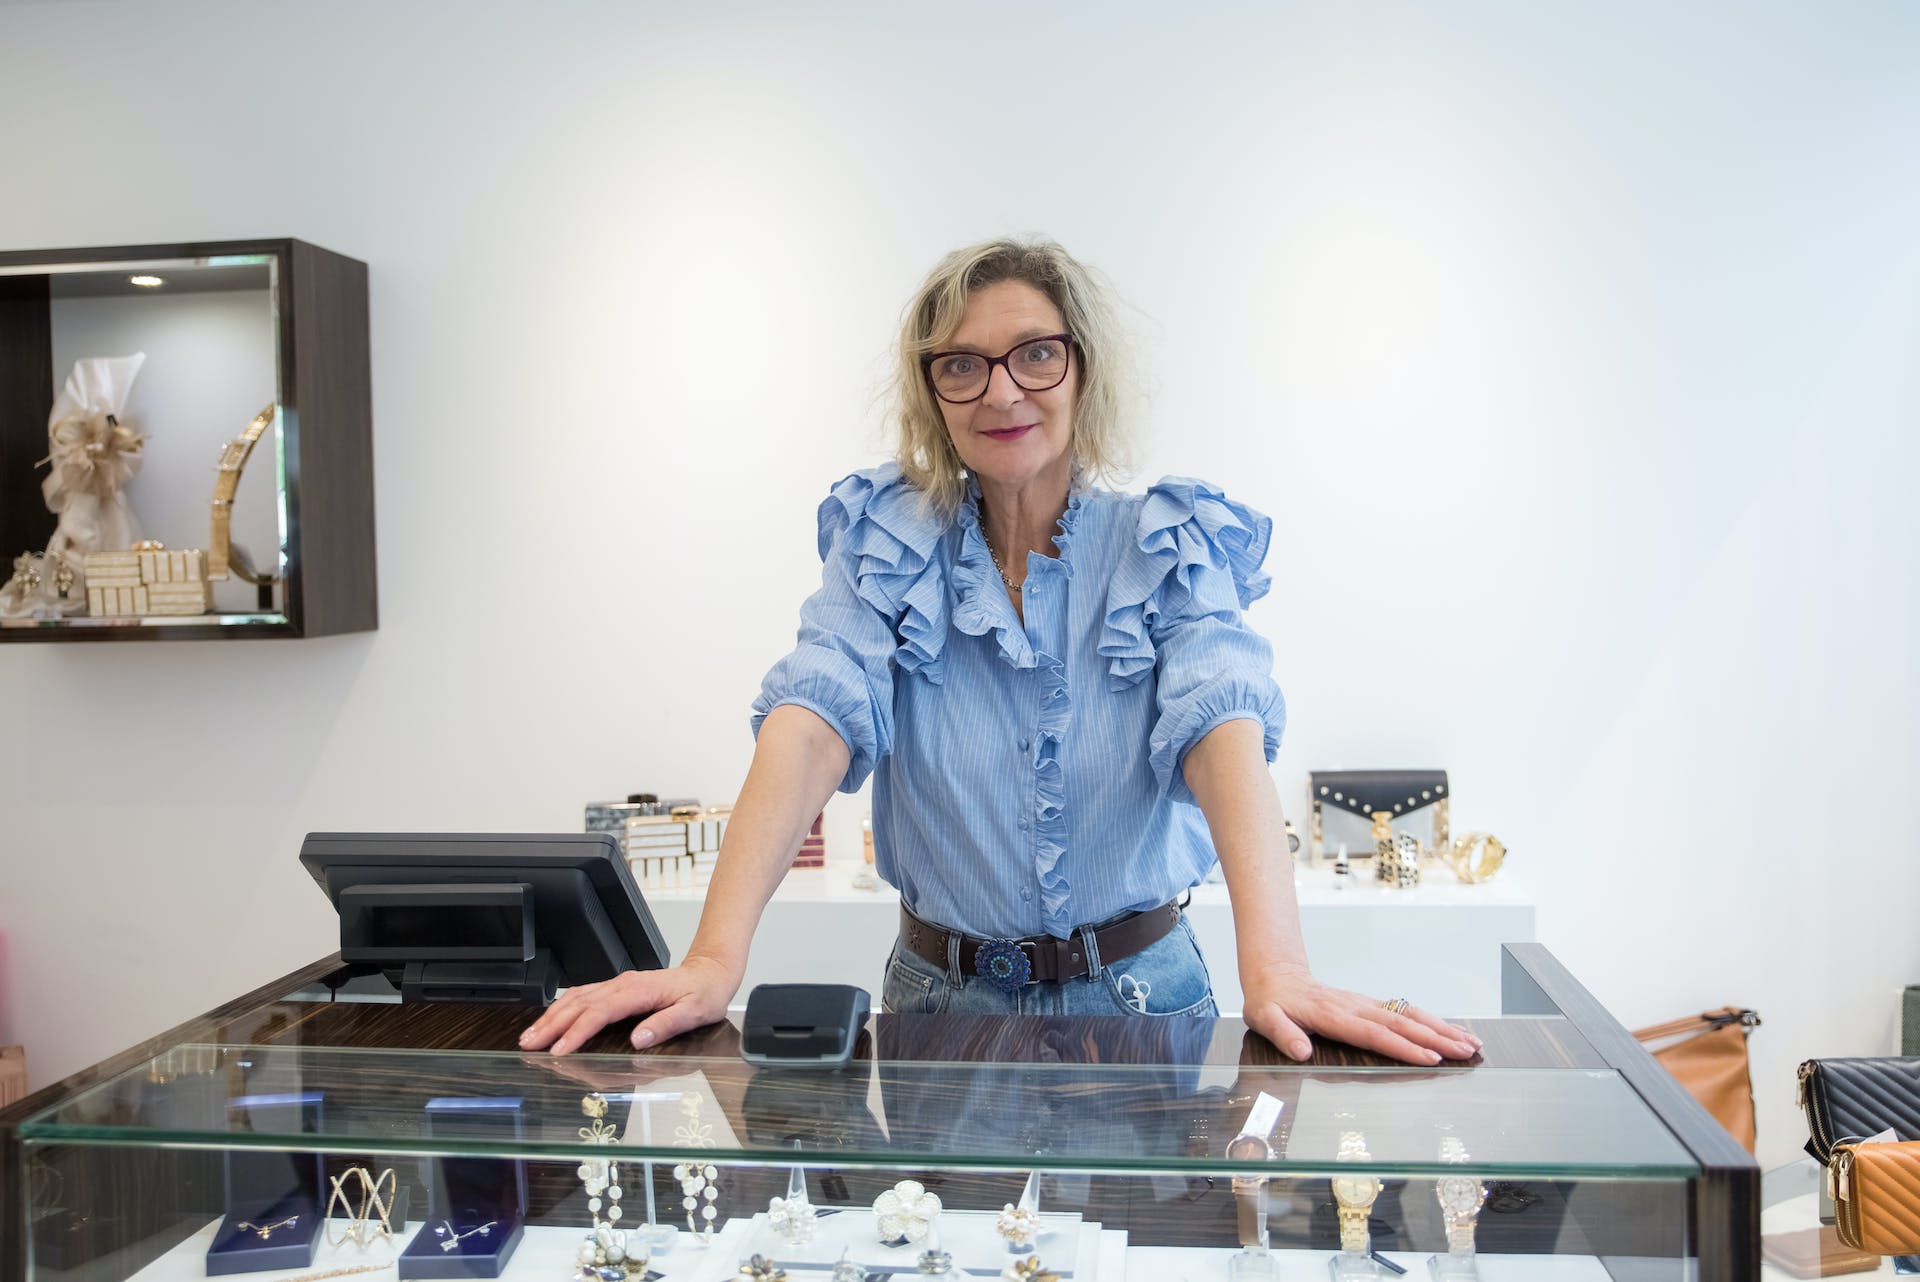 A woman standing at the counter of a jewelry store | Source: Pexels